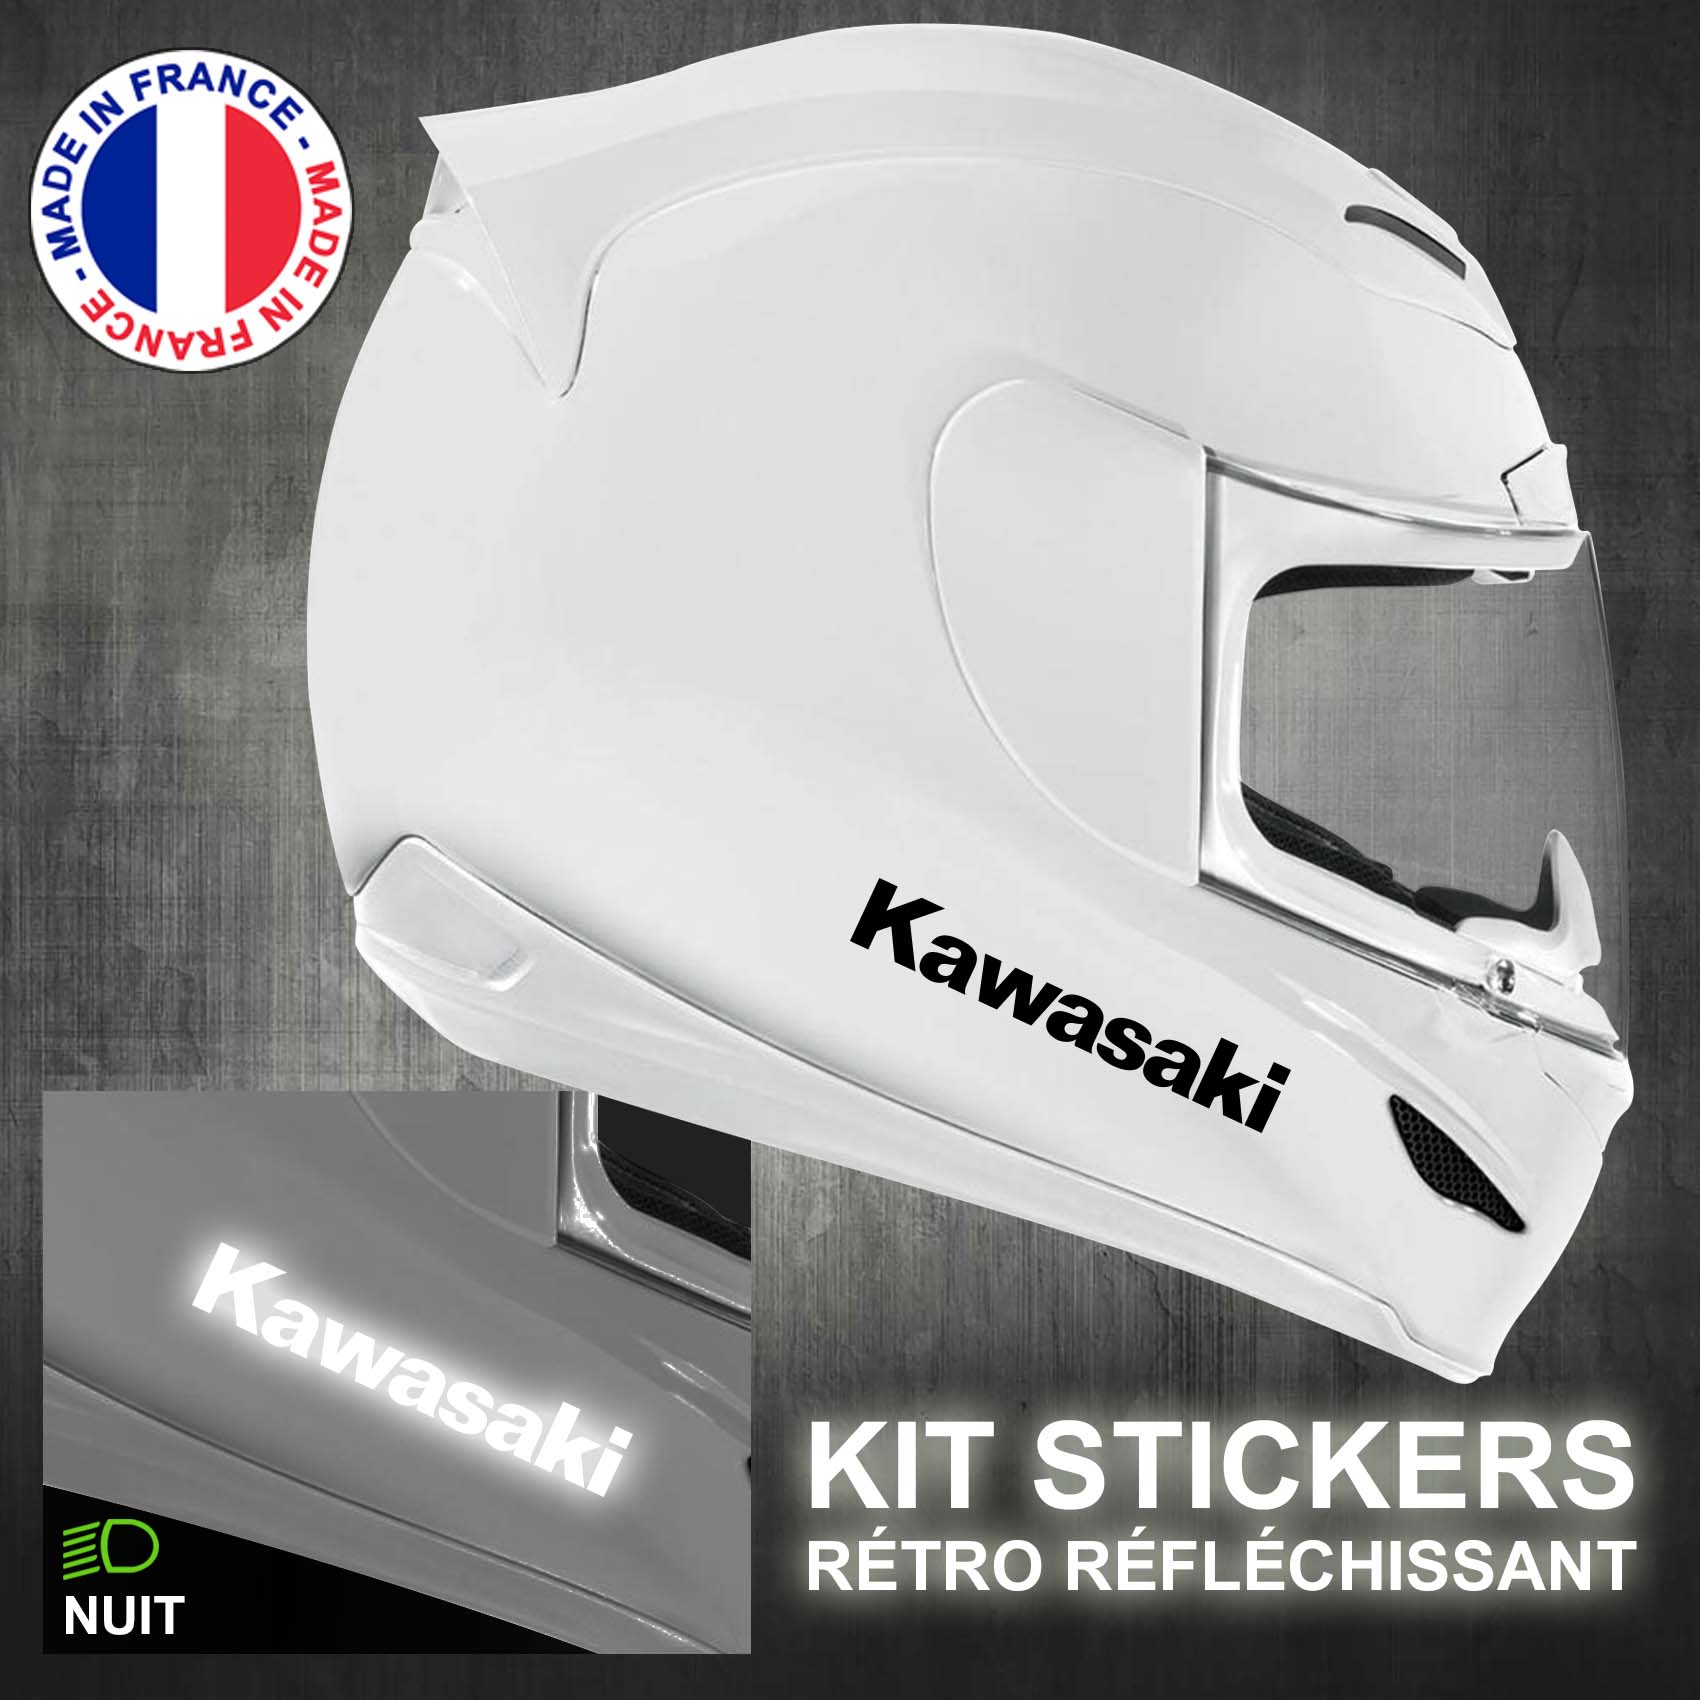 stickers-casque-moto-kawasaki-ref3-retro-reflechissant-autocollant-moto-velo-tuning-racing-route-sticker-casques-adhesif-scooter-nuit-securite-decals-personnalise-personnalisable-min